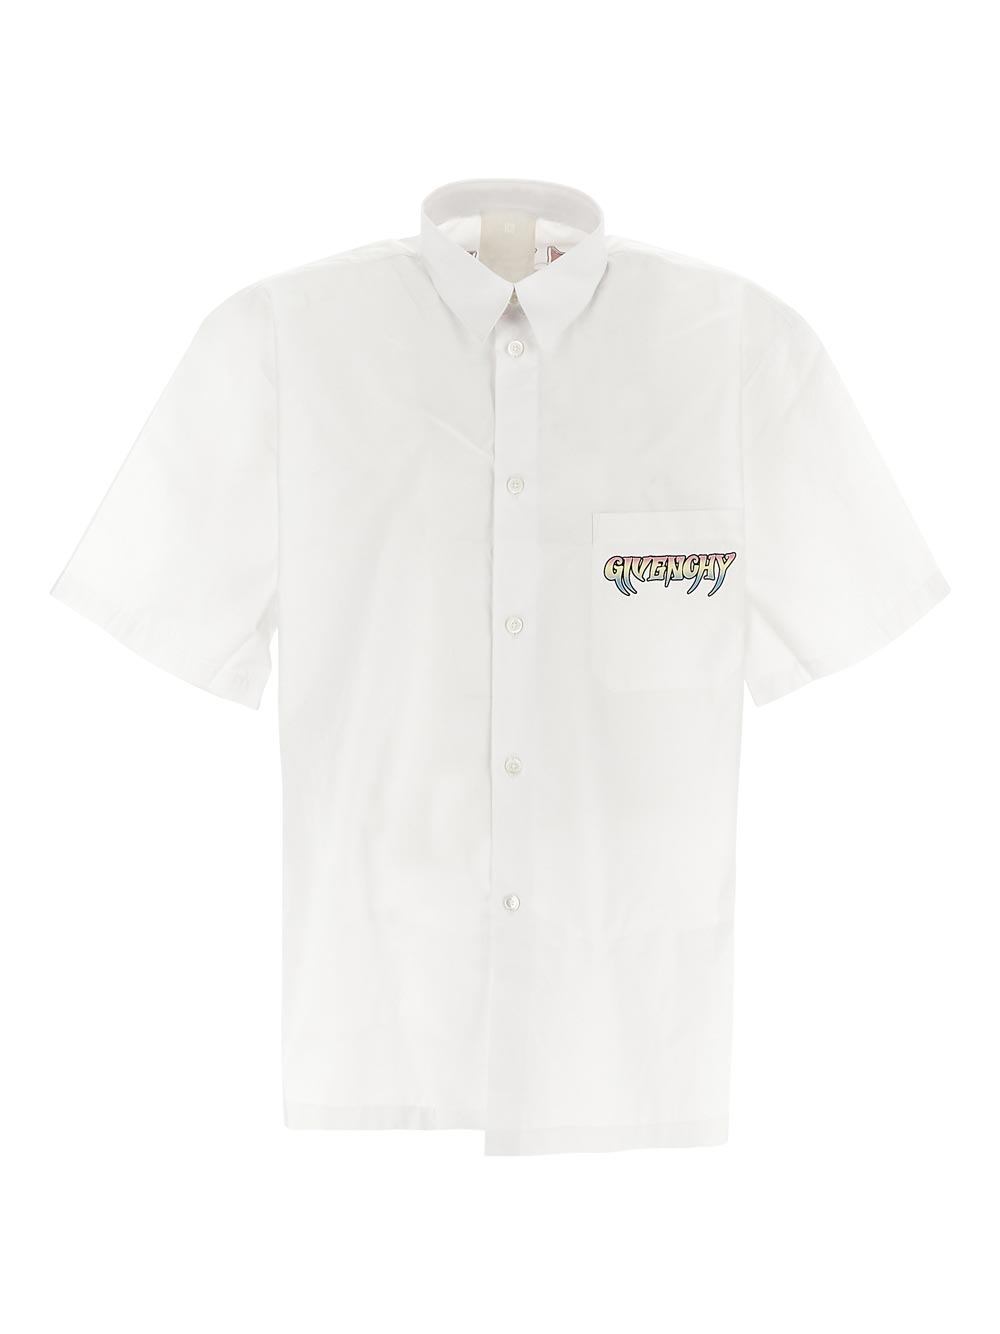 Givenchy Shirt In Poplin With Givenchy World Tour Print